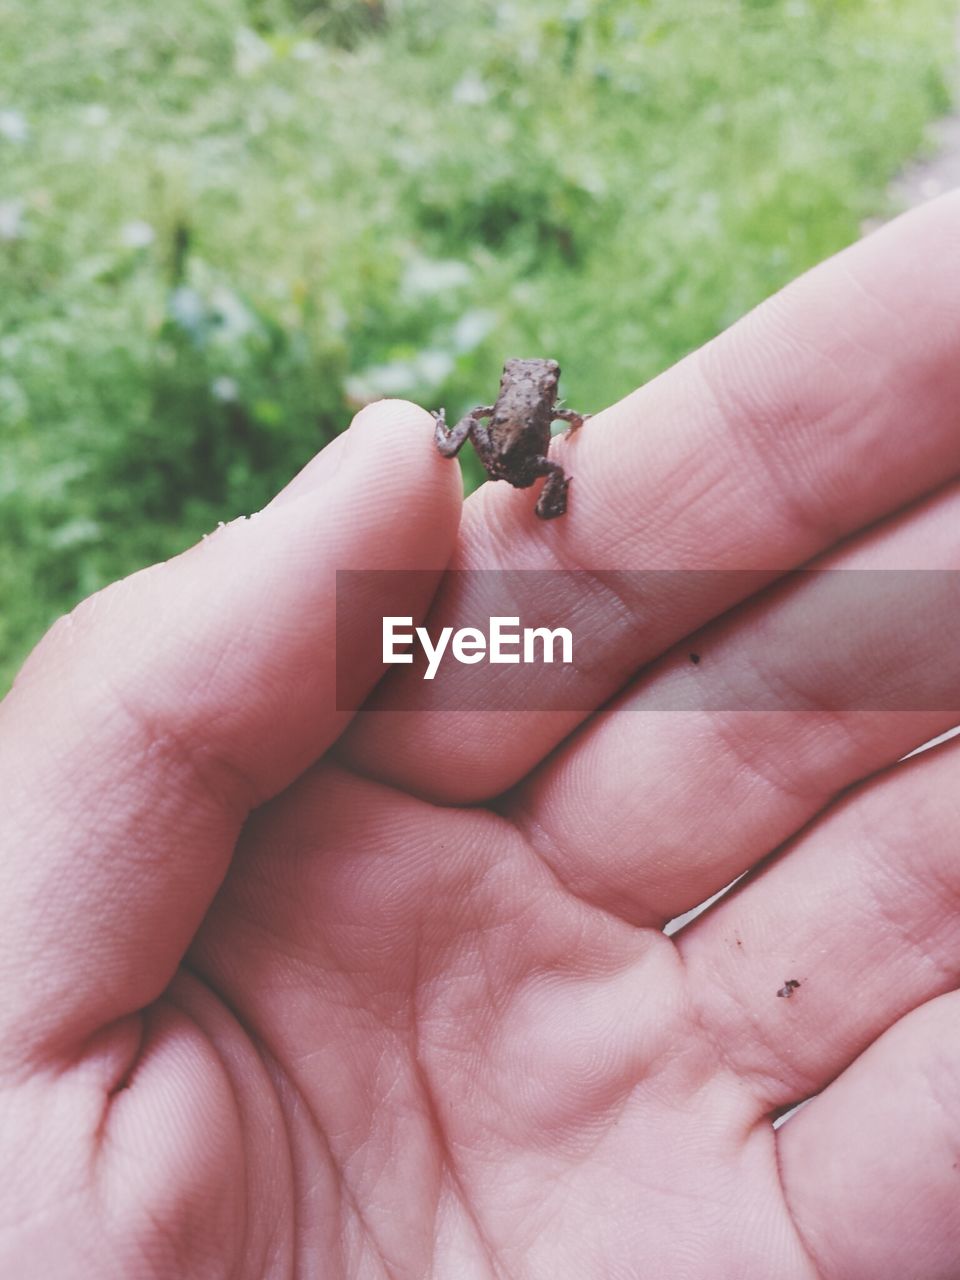 Cropped image of hand holding frog